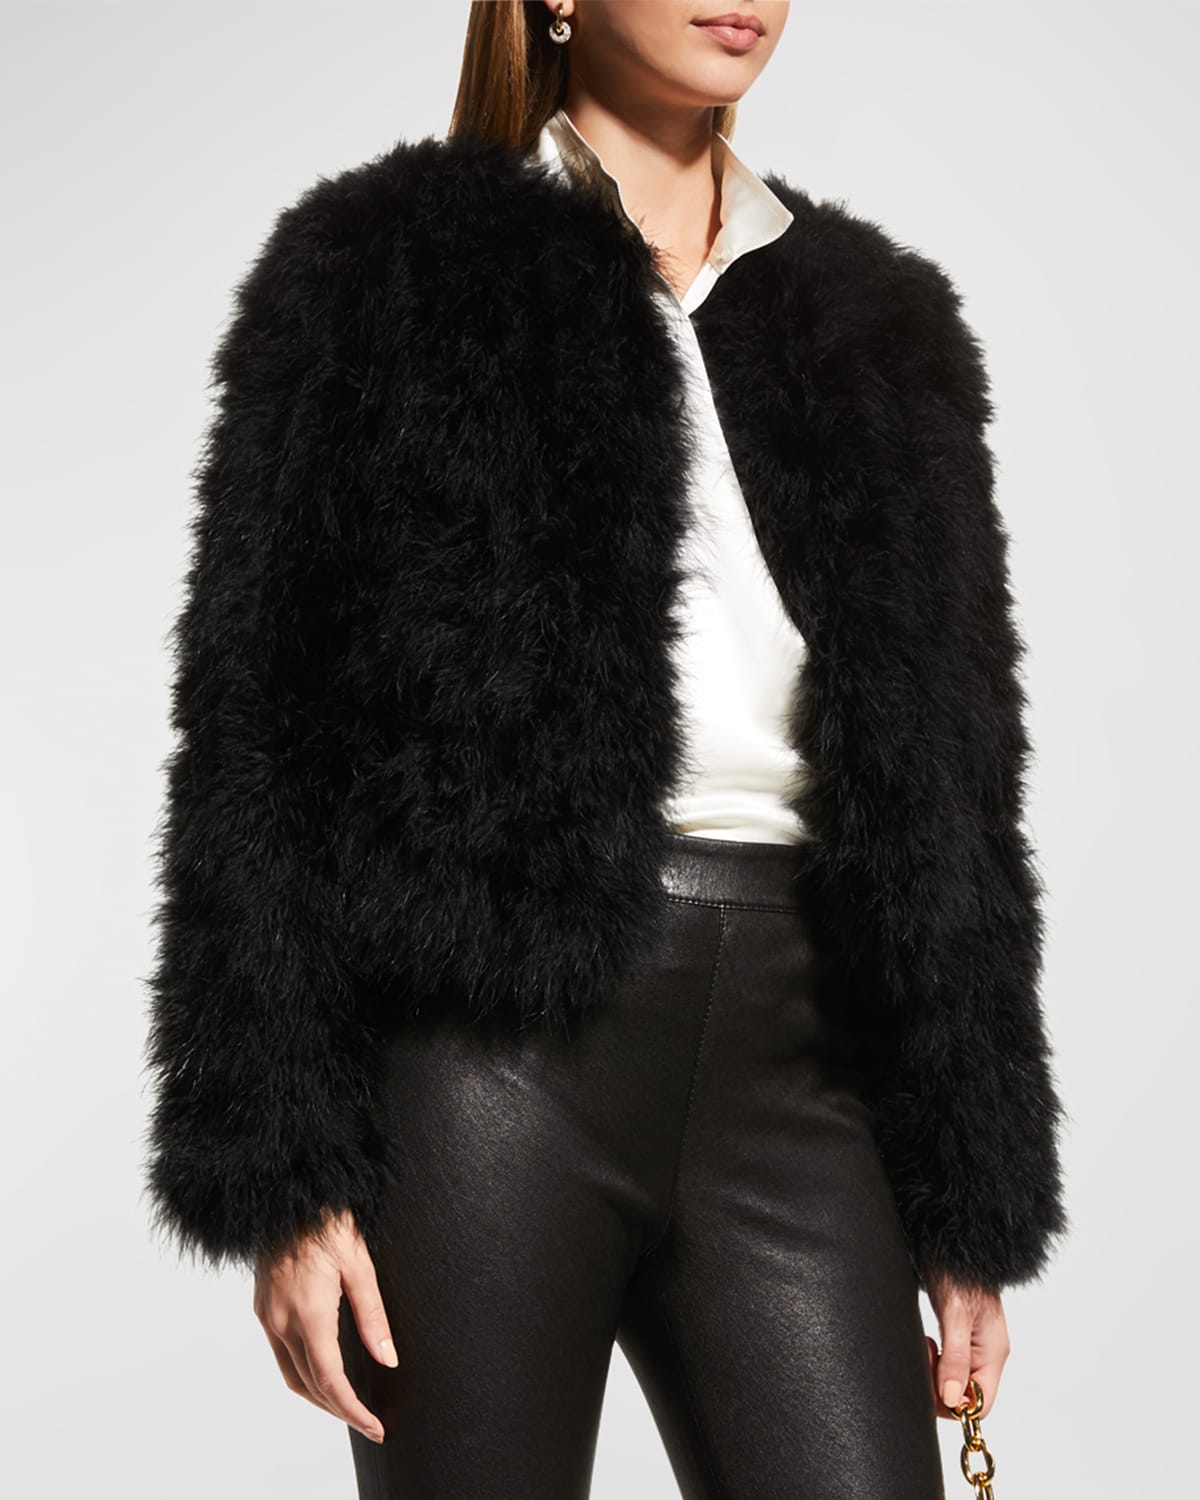 LaMarque Deora Feather Topper Jacket